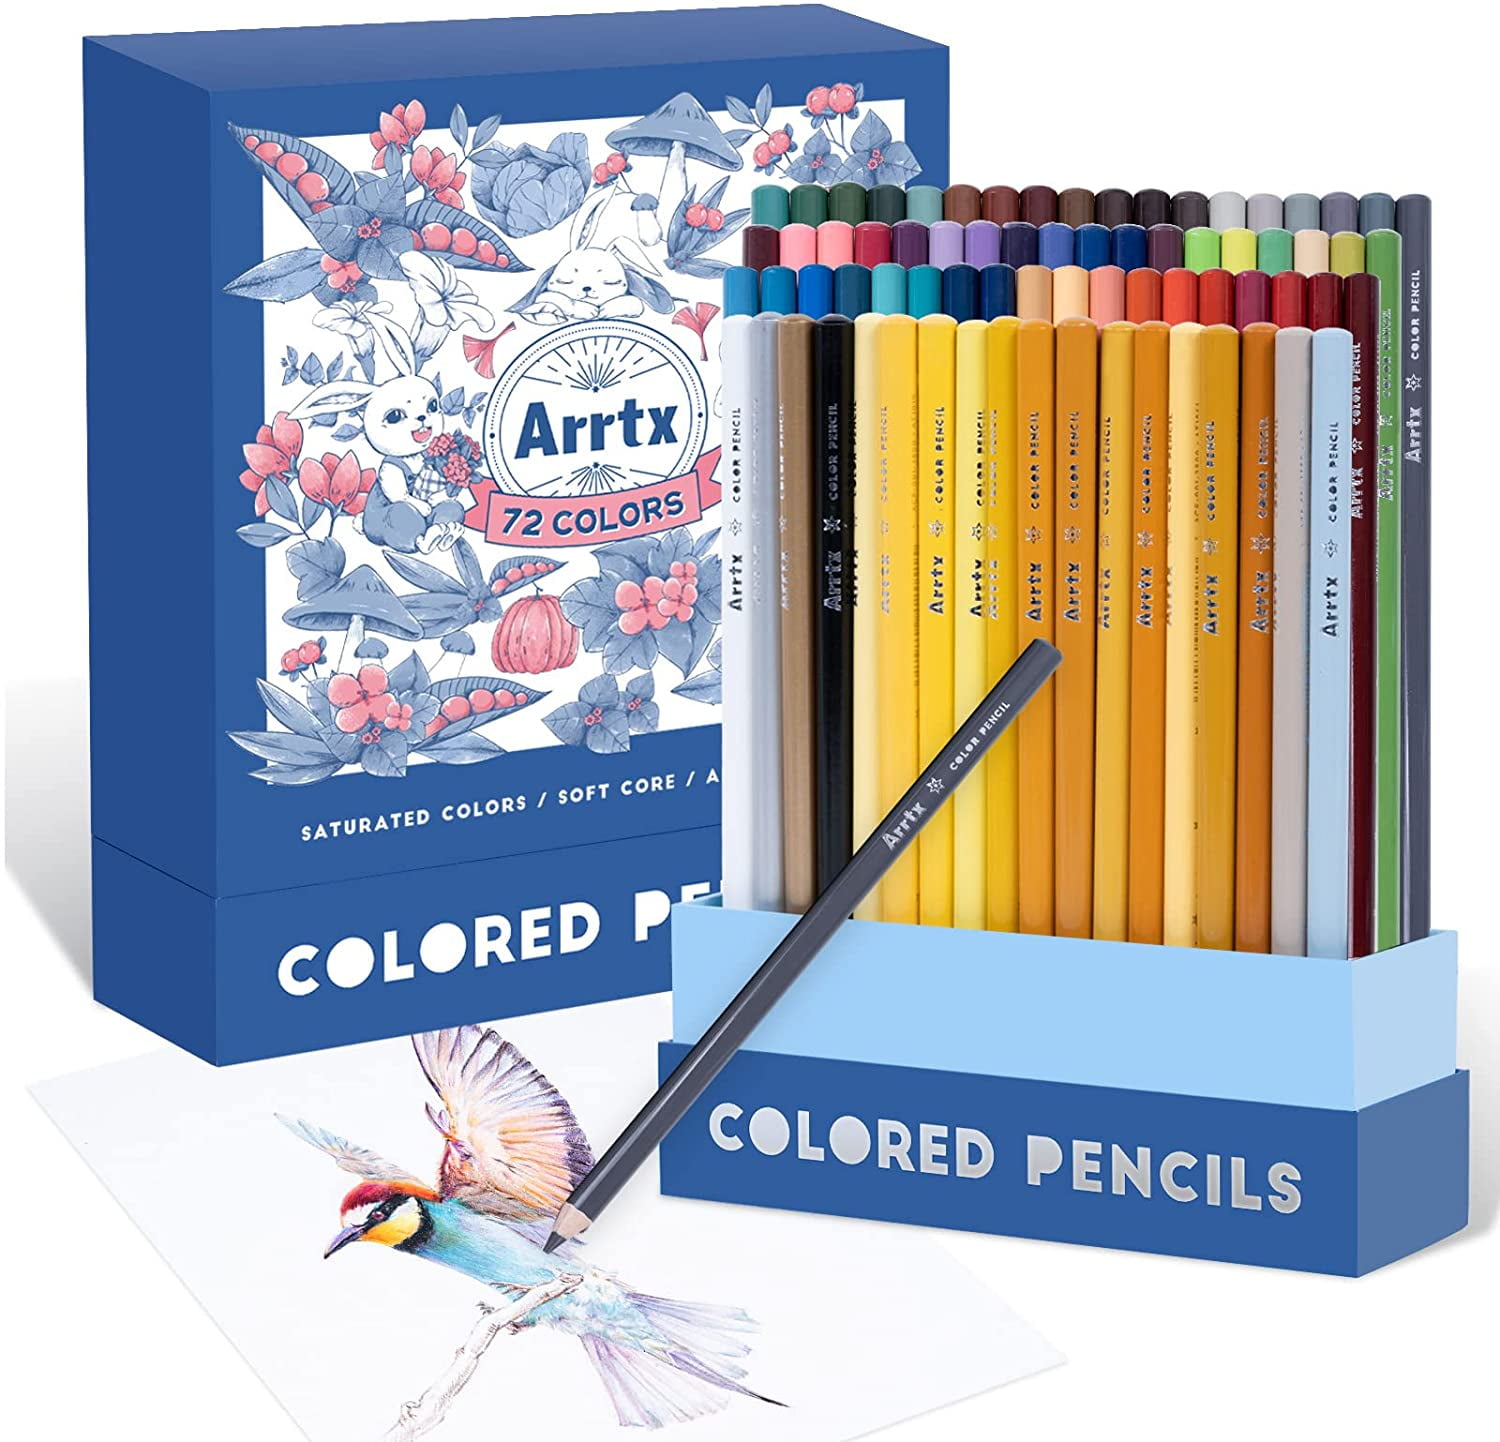 72 Color Colored Pencils Soft Core Art Coloring Drawing for Adult Book  Colors for sale online